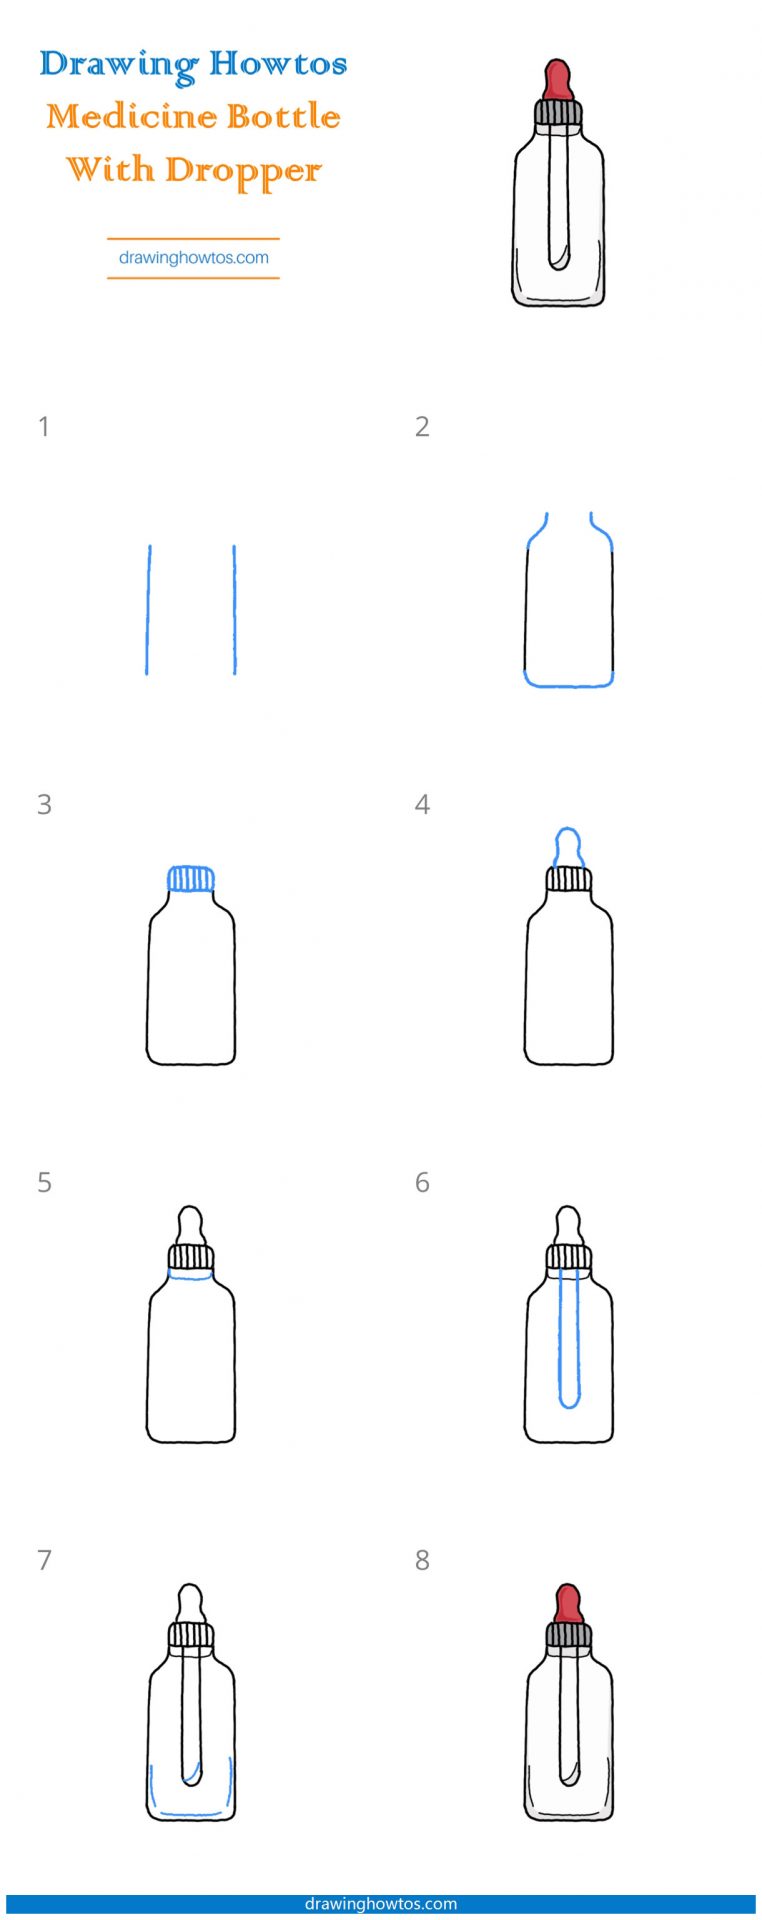 How to Draw a Medicine Bottle with a Dropper Step by Step